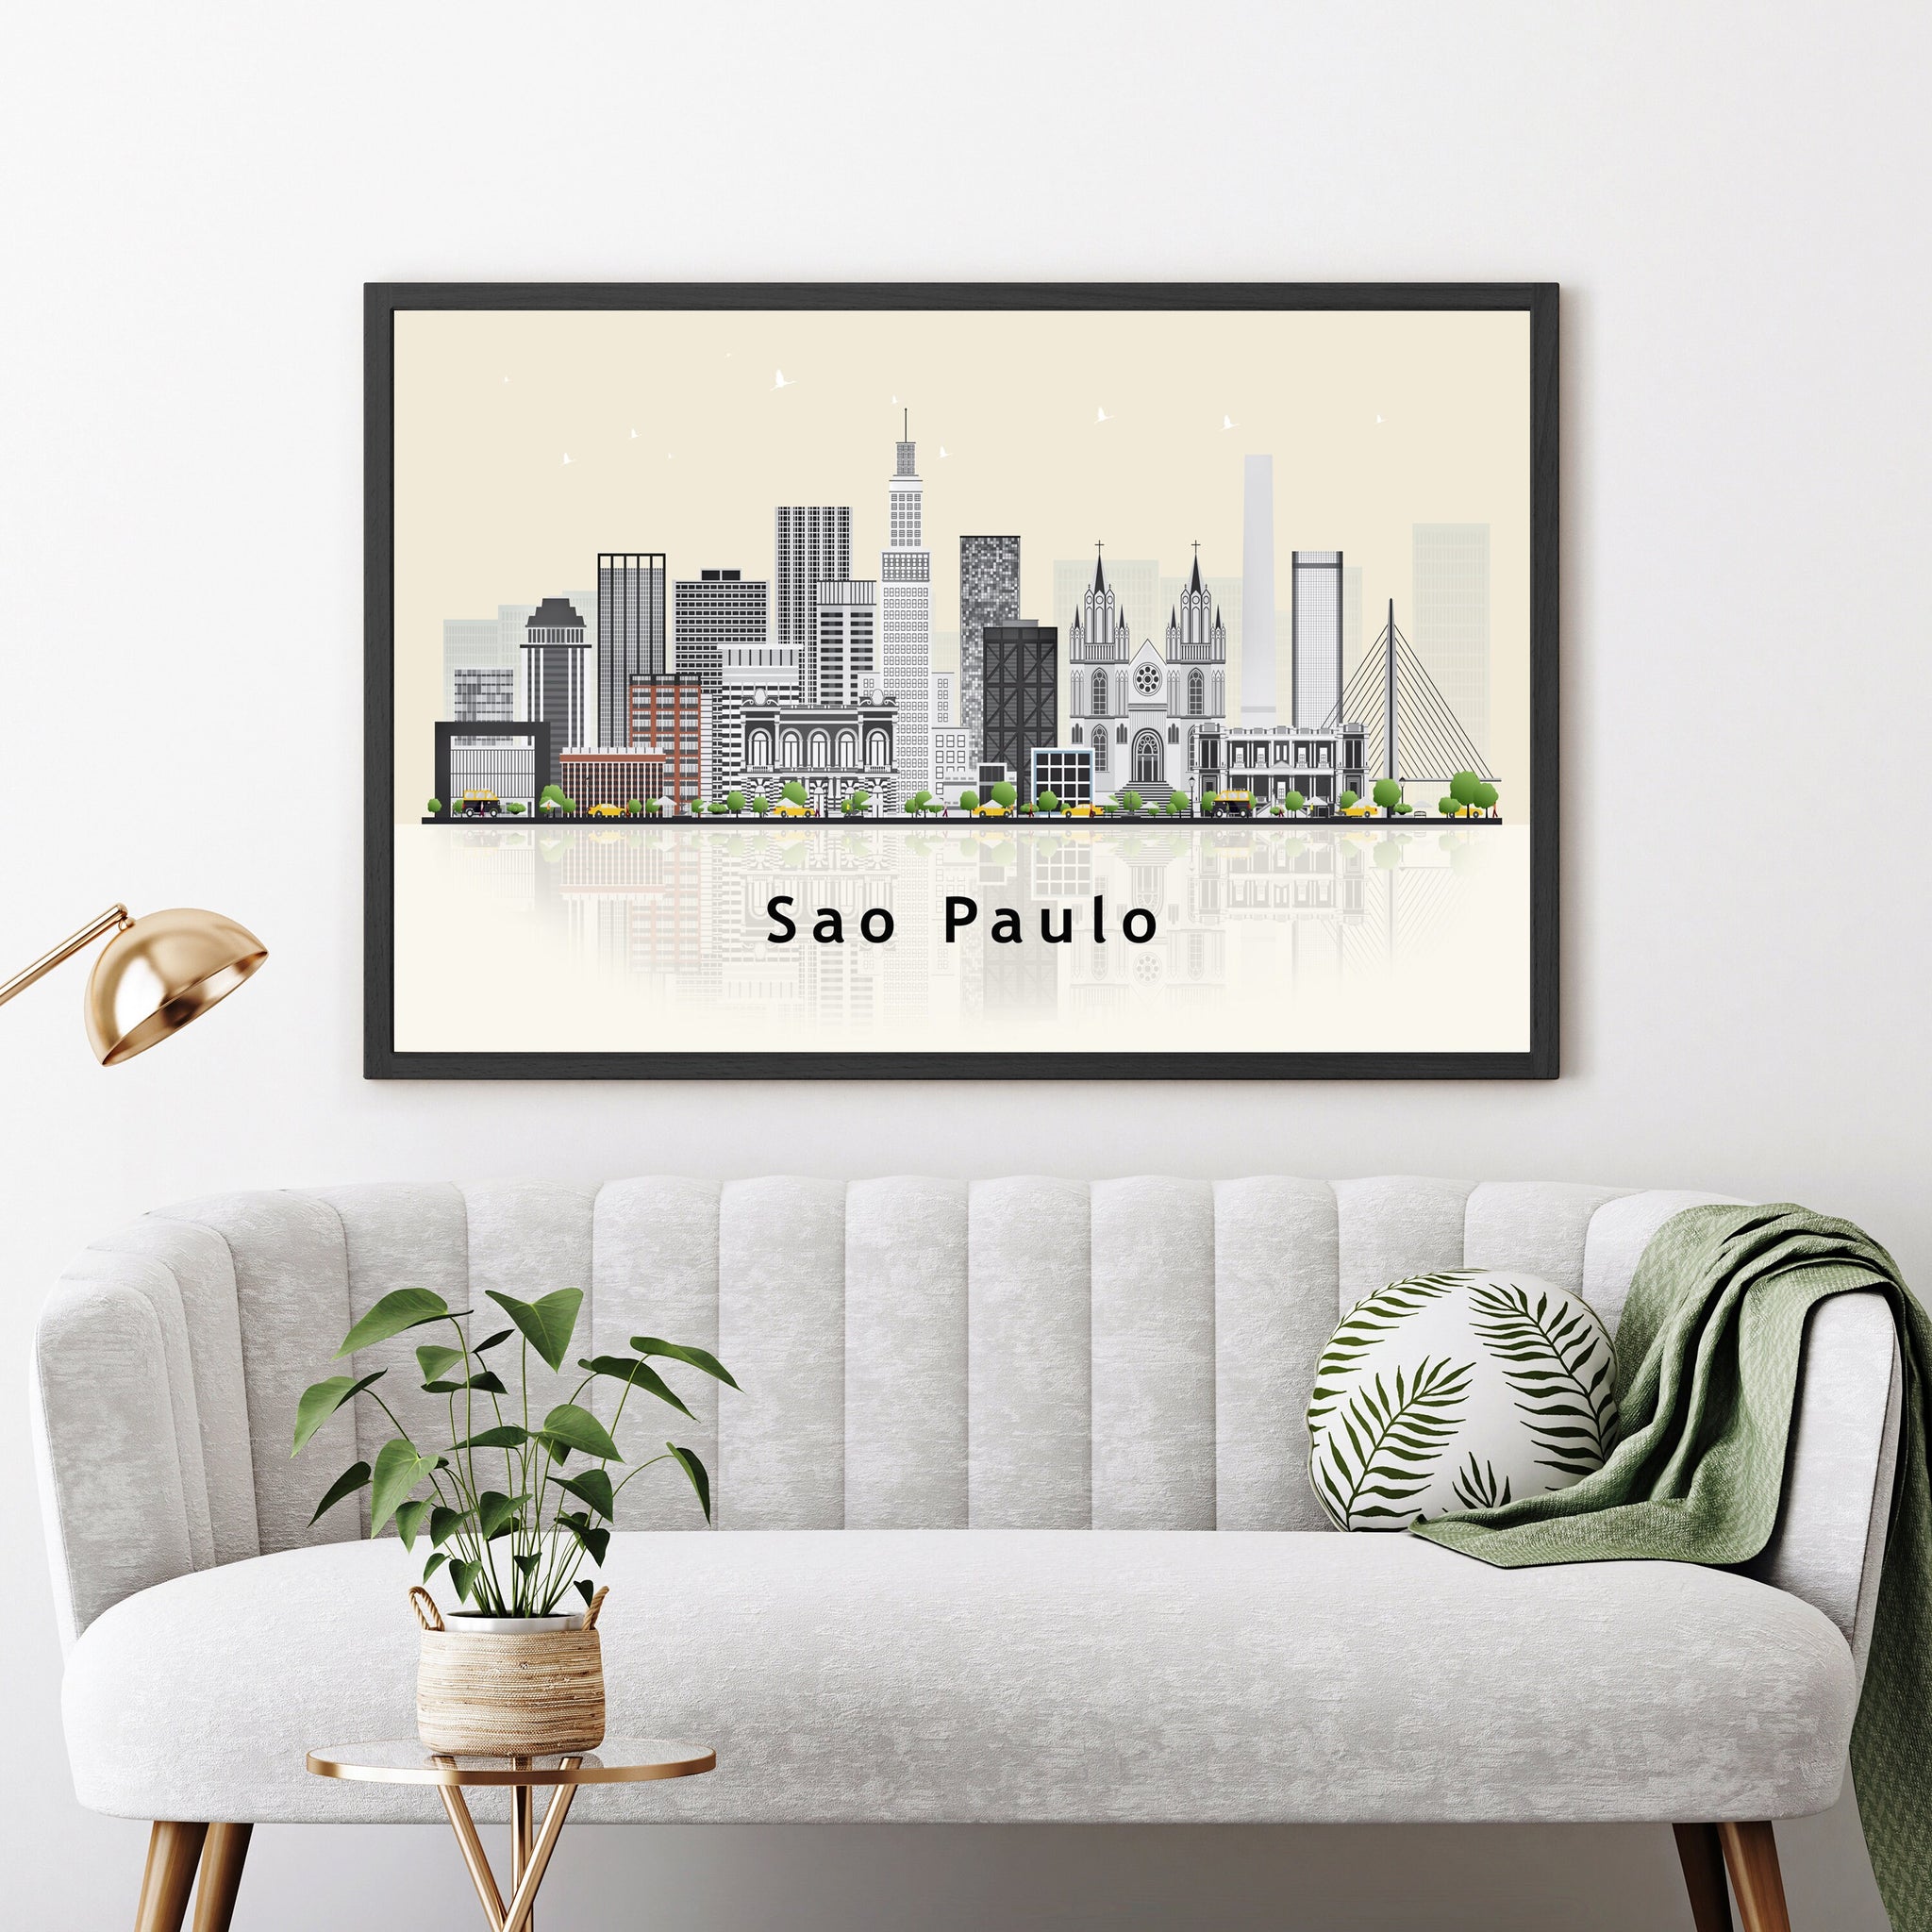 SAO PAULO Brazil Illustration skyline poster, Modern skyline cityscape poster, City skyline landmark map poster, Home wall decoration